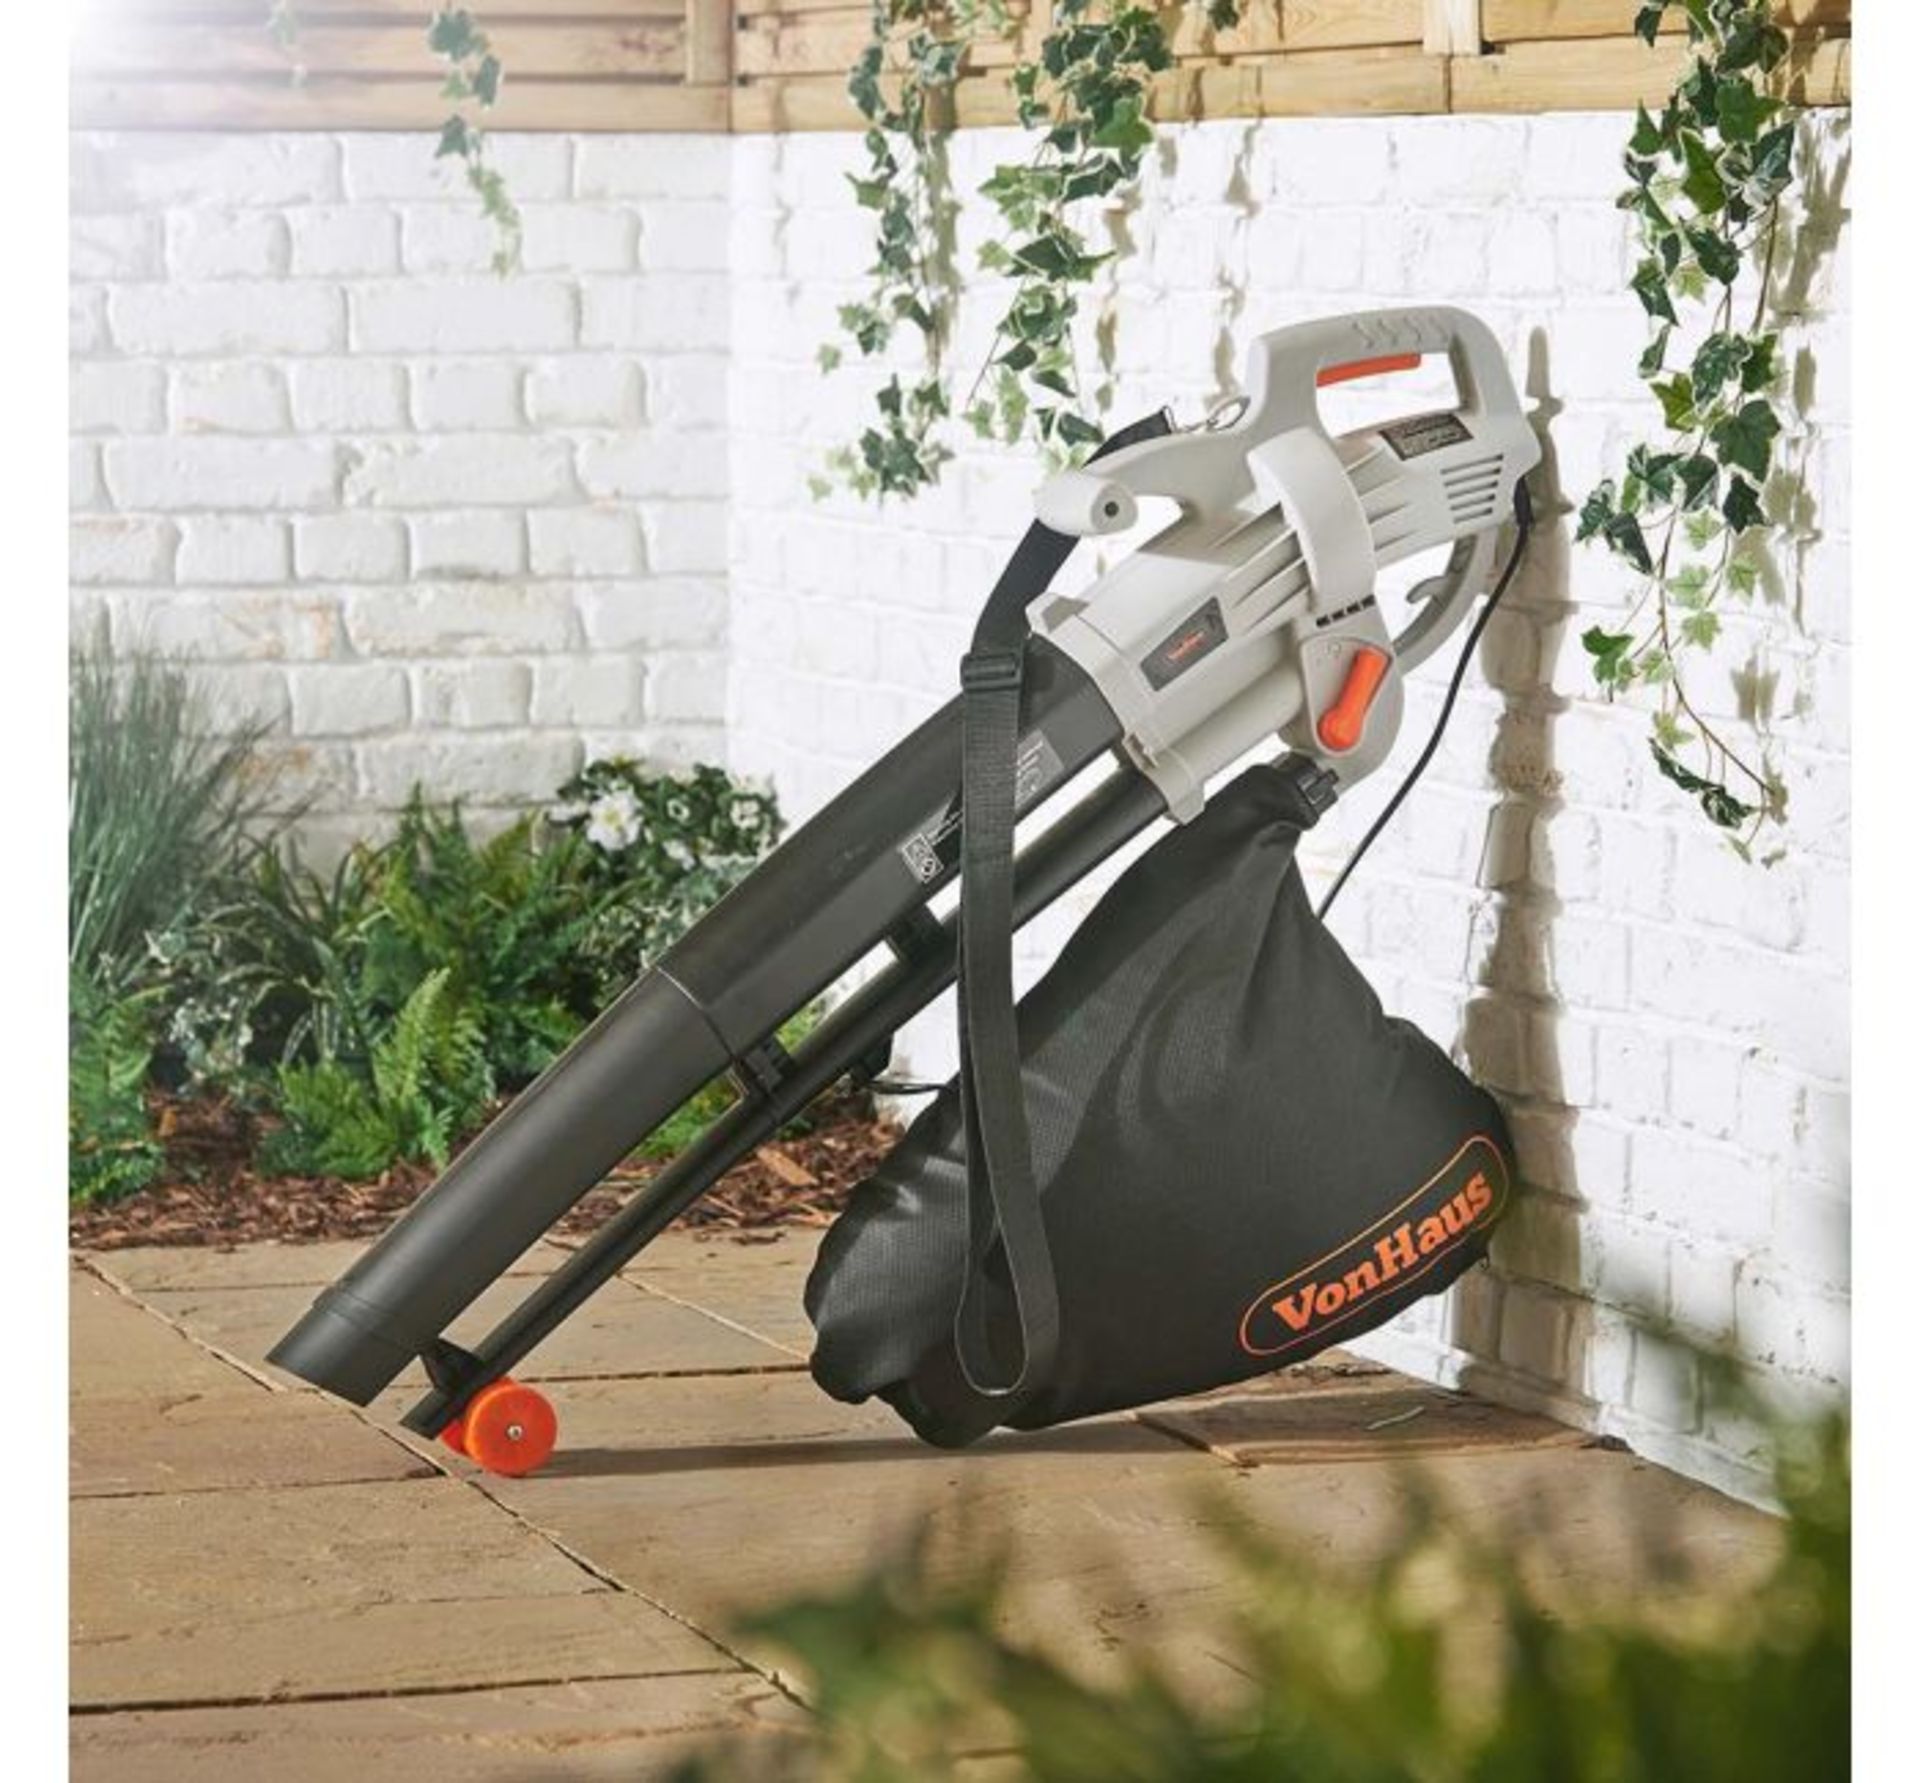 (LT15) 3000W Leaf Blower Powerful 3000W motor blows, vacuums and mulches leaves Automatic mul...